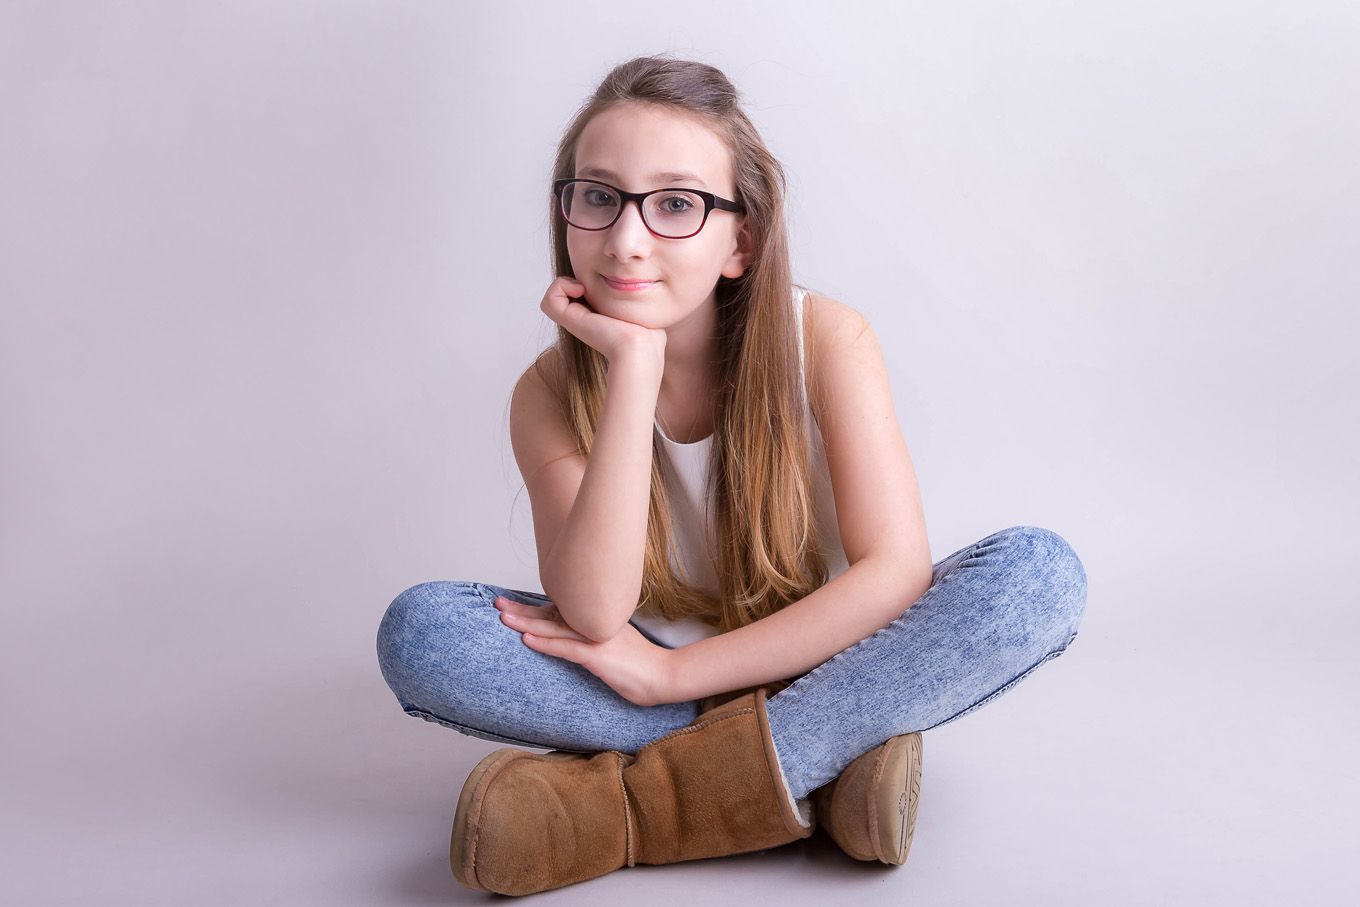 Portrait of a teenage girl in a studio with backdrop and lighting equipment